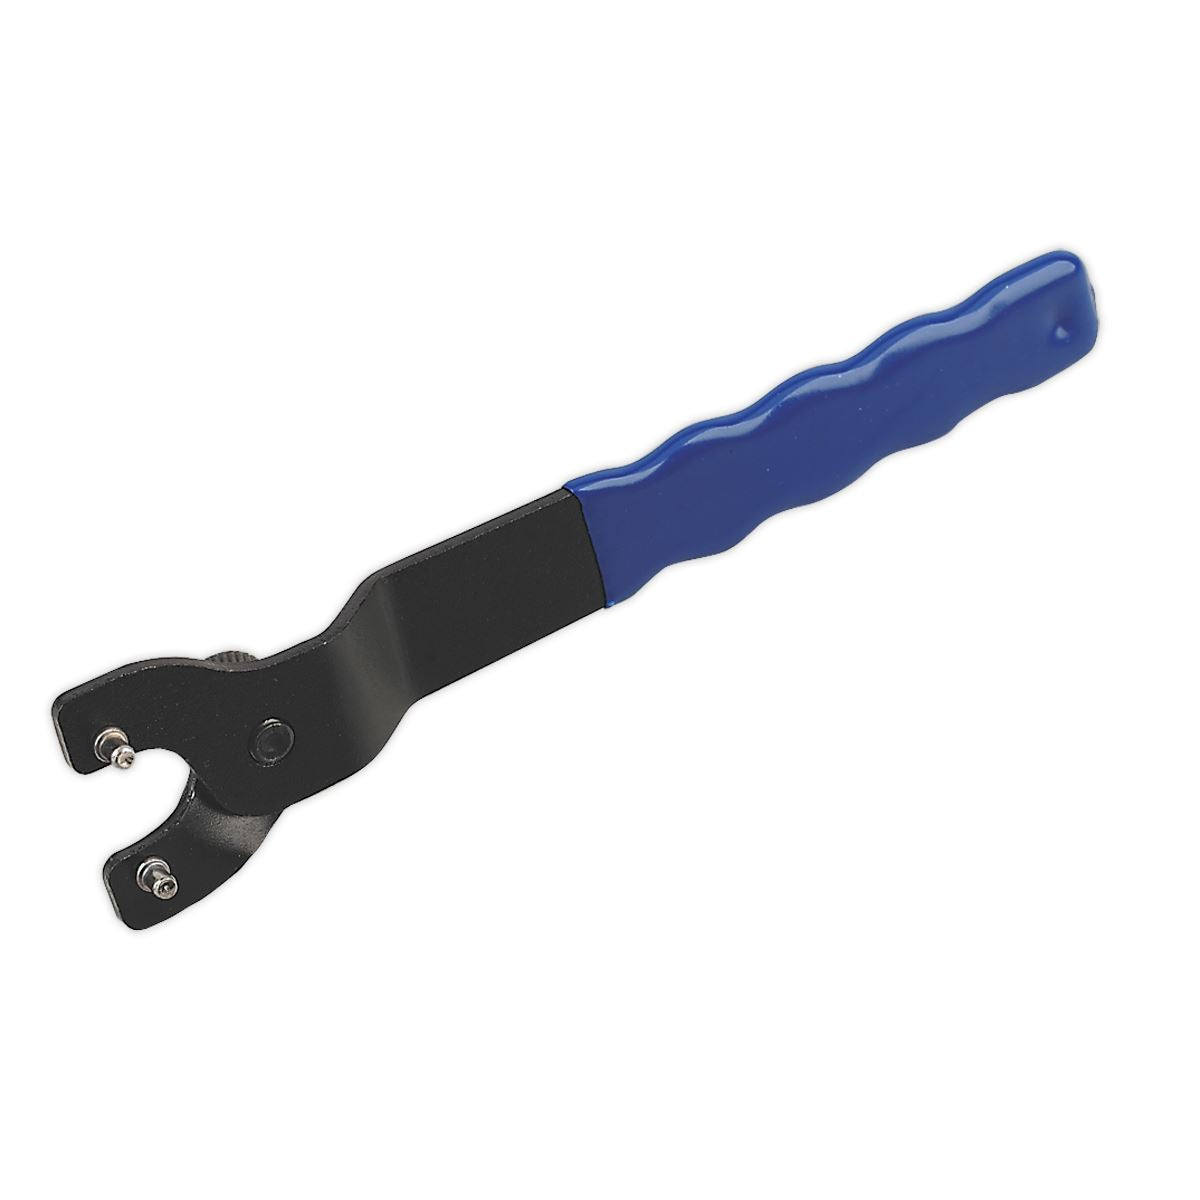 Sealey Angle Grinder Pin Wrench Adjustable 10-30mm